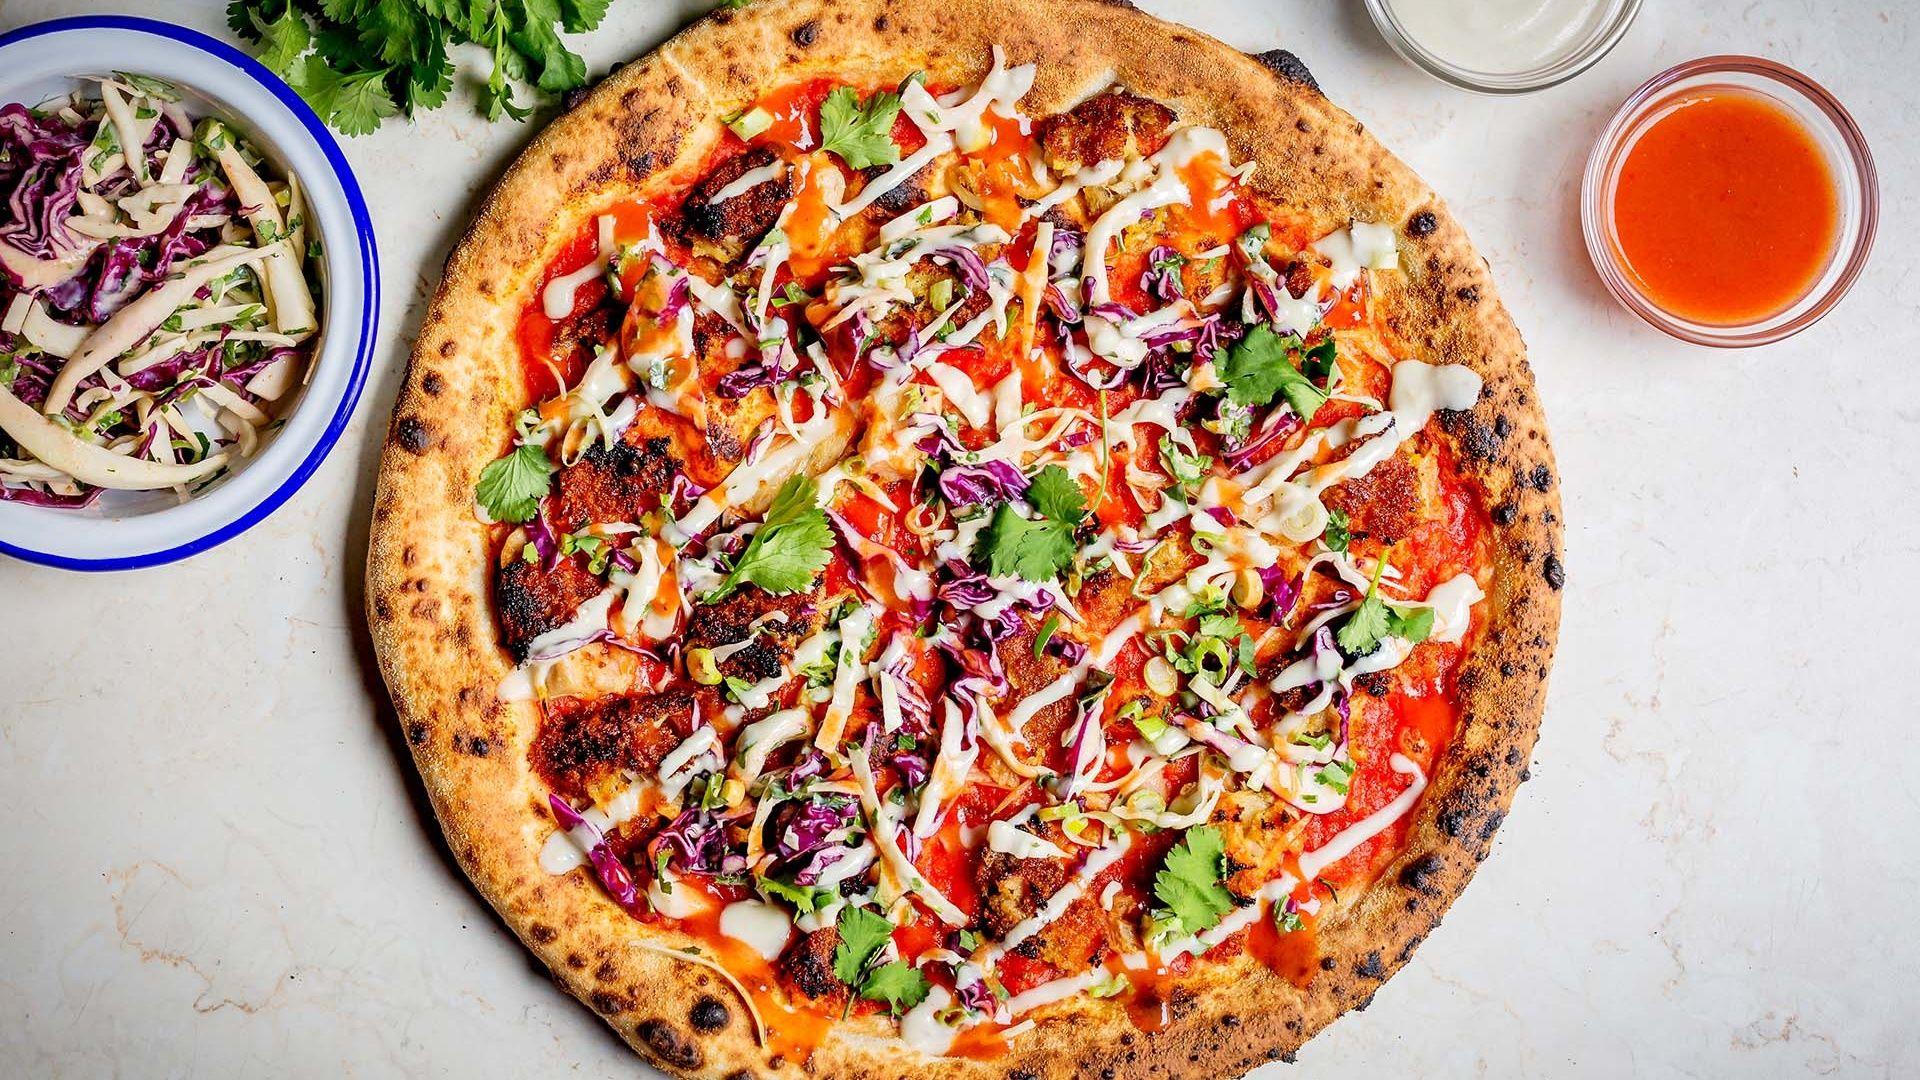 Six unique offerings for National Pizza Day